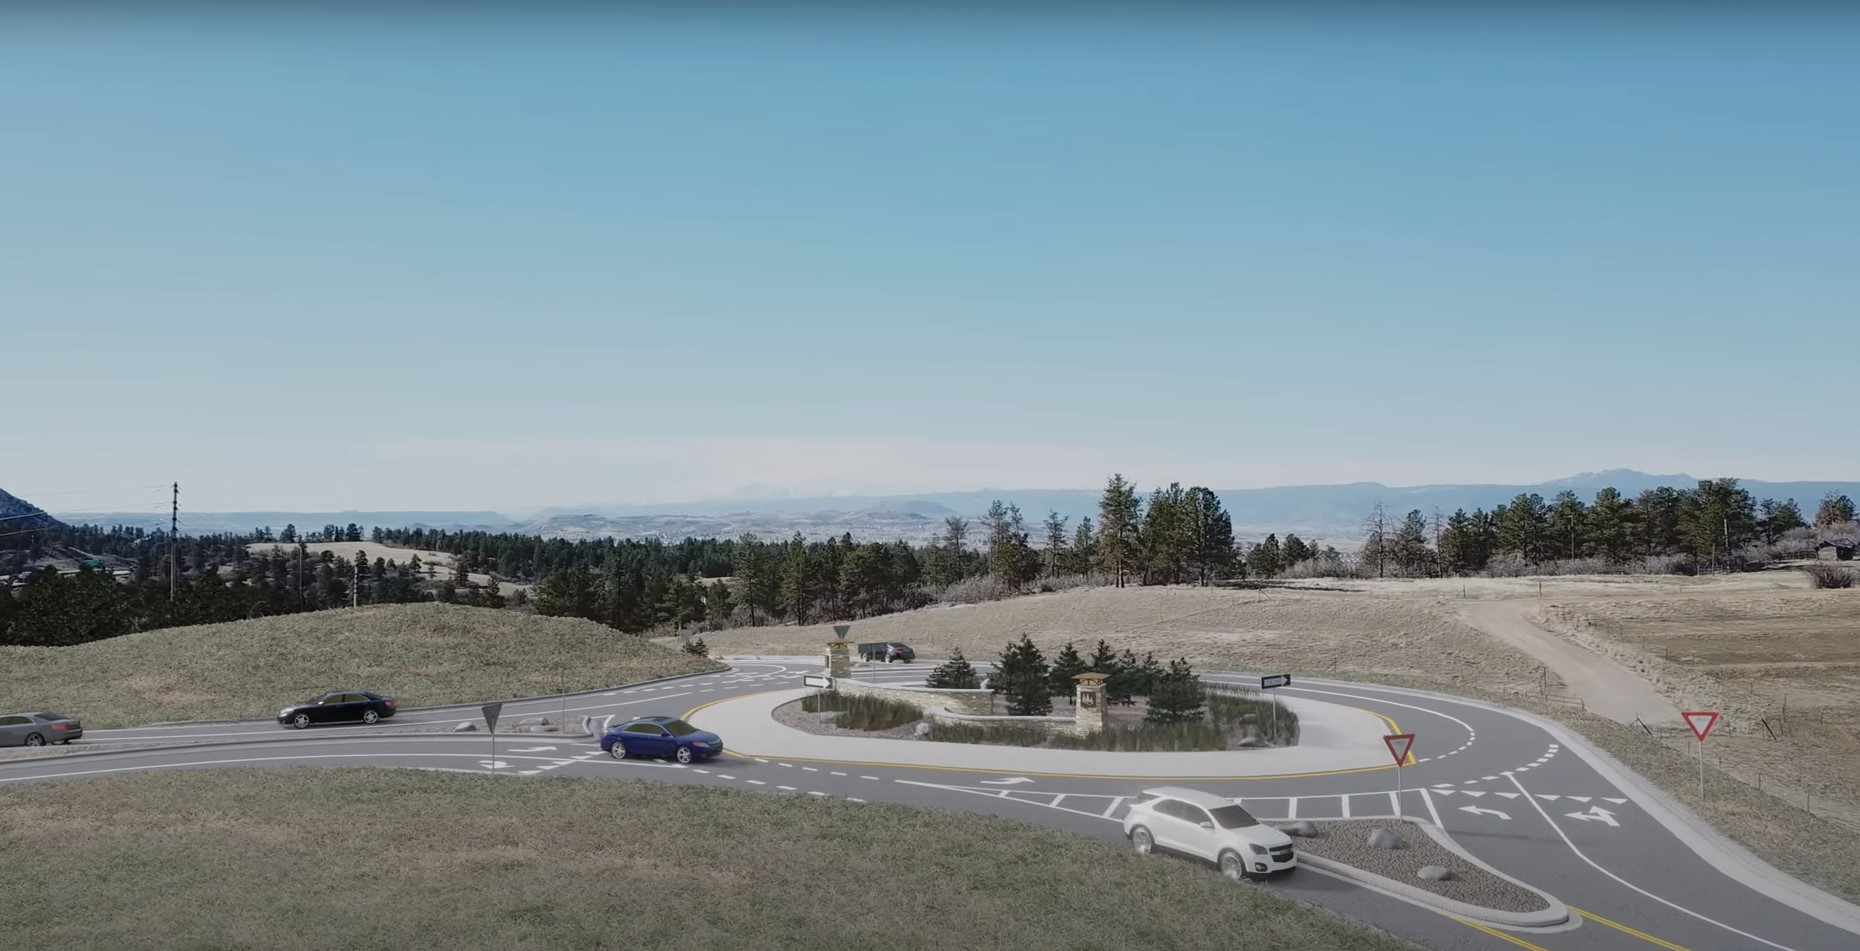 Rendering of the future roundabout at Happy Canyon Road and Lagae Road